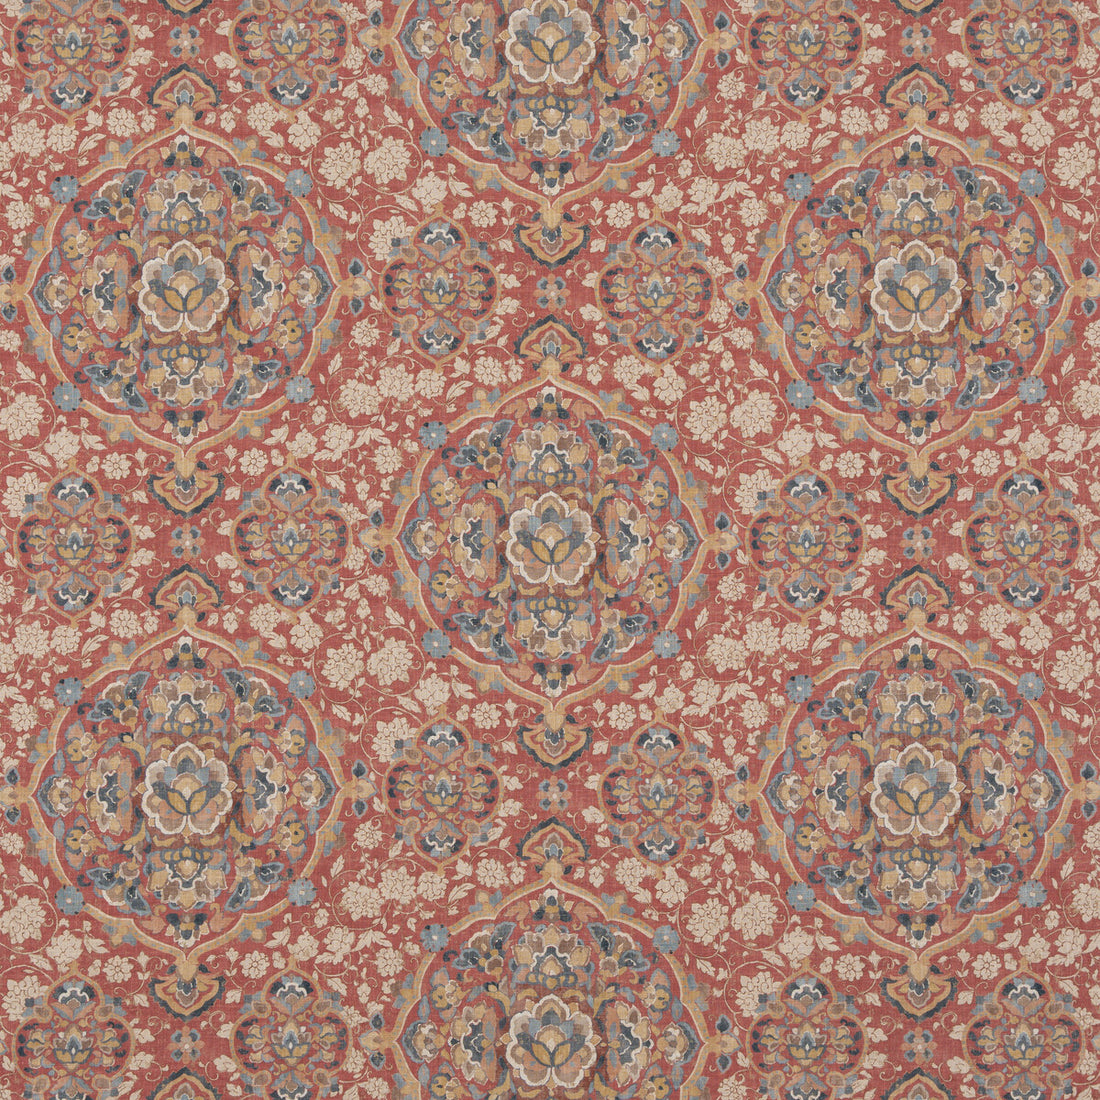 Kiana fabric in red/blue color - pattern BP10928.4.0 - by G P &amp; J Baker in the Caspian collection